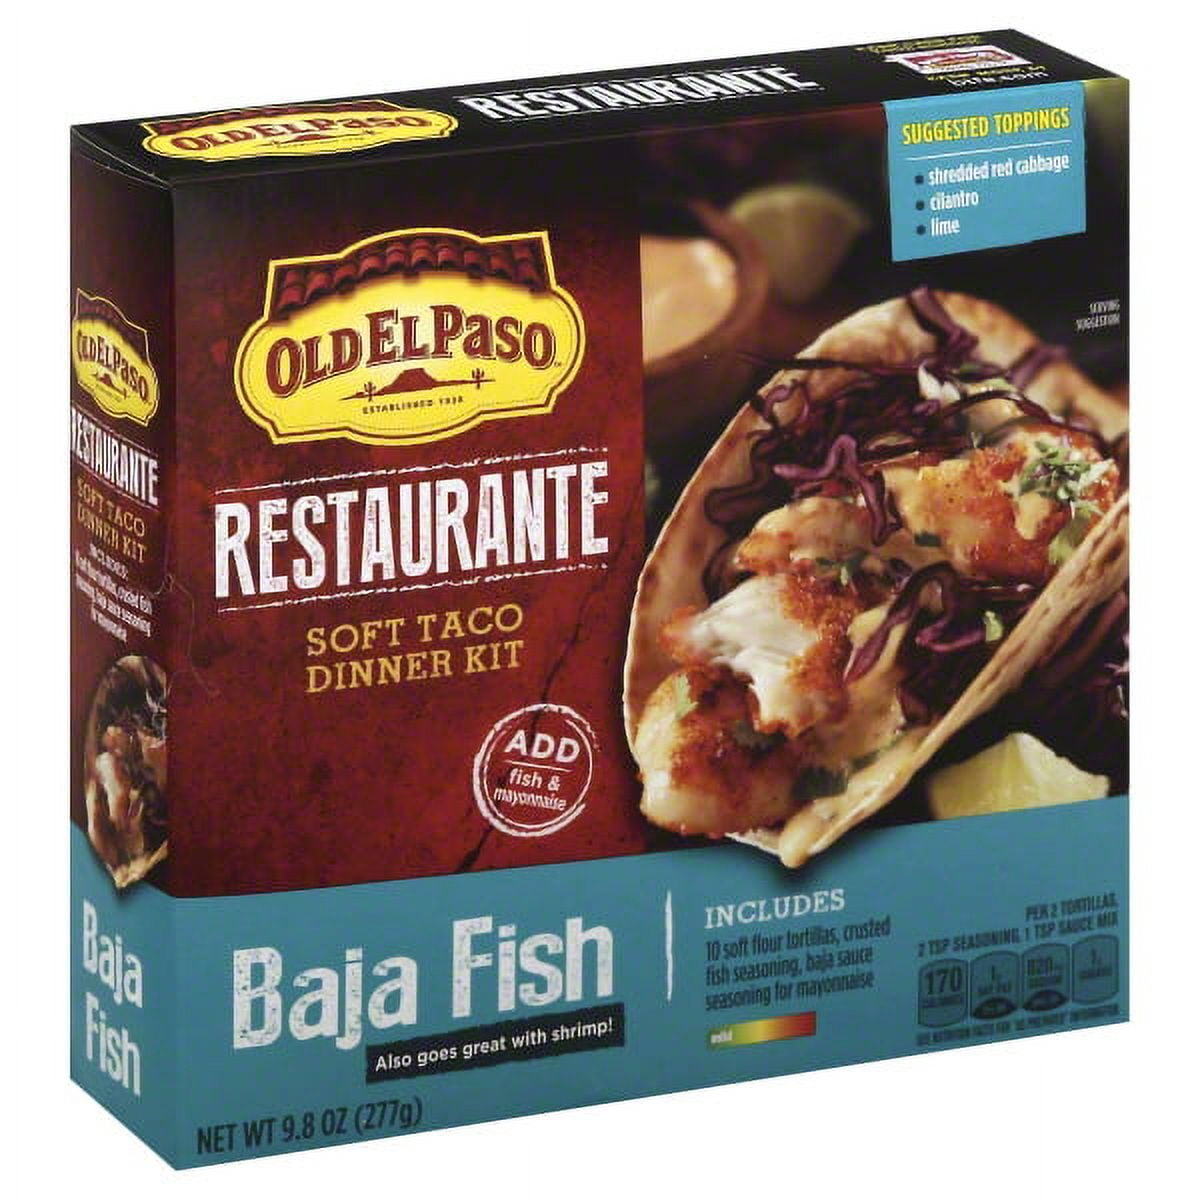 Old El Paso teams up with Samworth Brothers for ready meal range